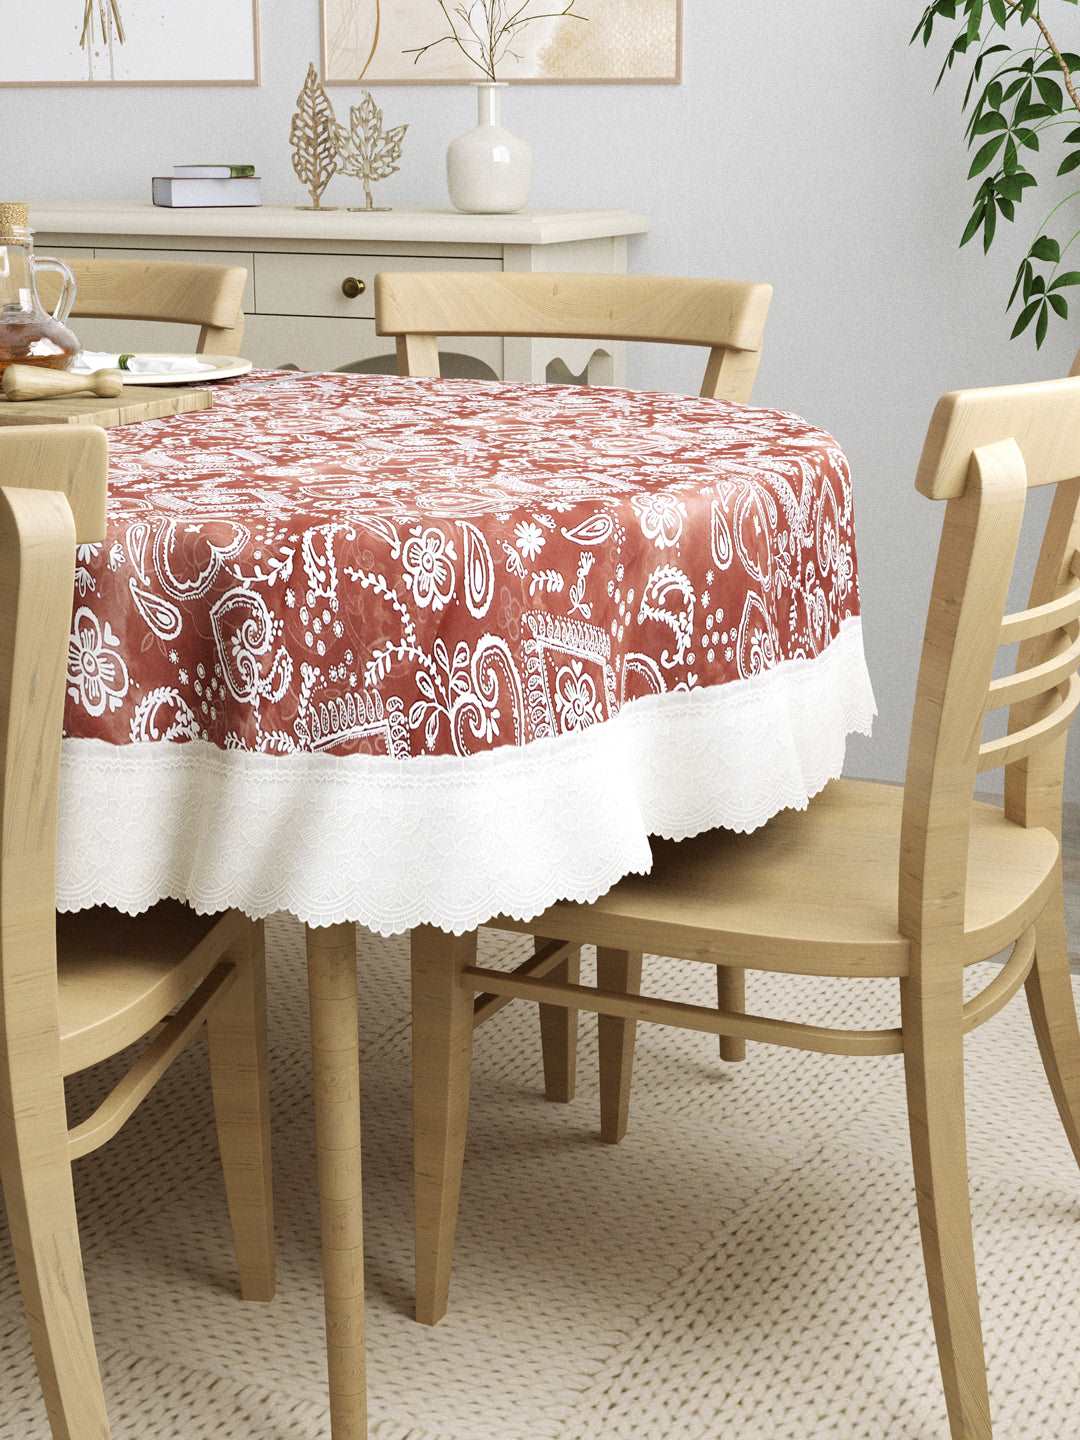 6 Seater Oval Dining Table Cover; 60x90 Inches; Material - PVC; Anti Slip; White Print On Brown